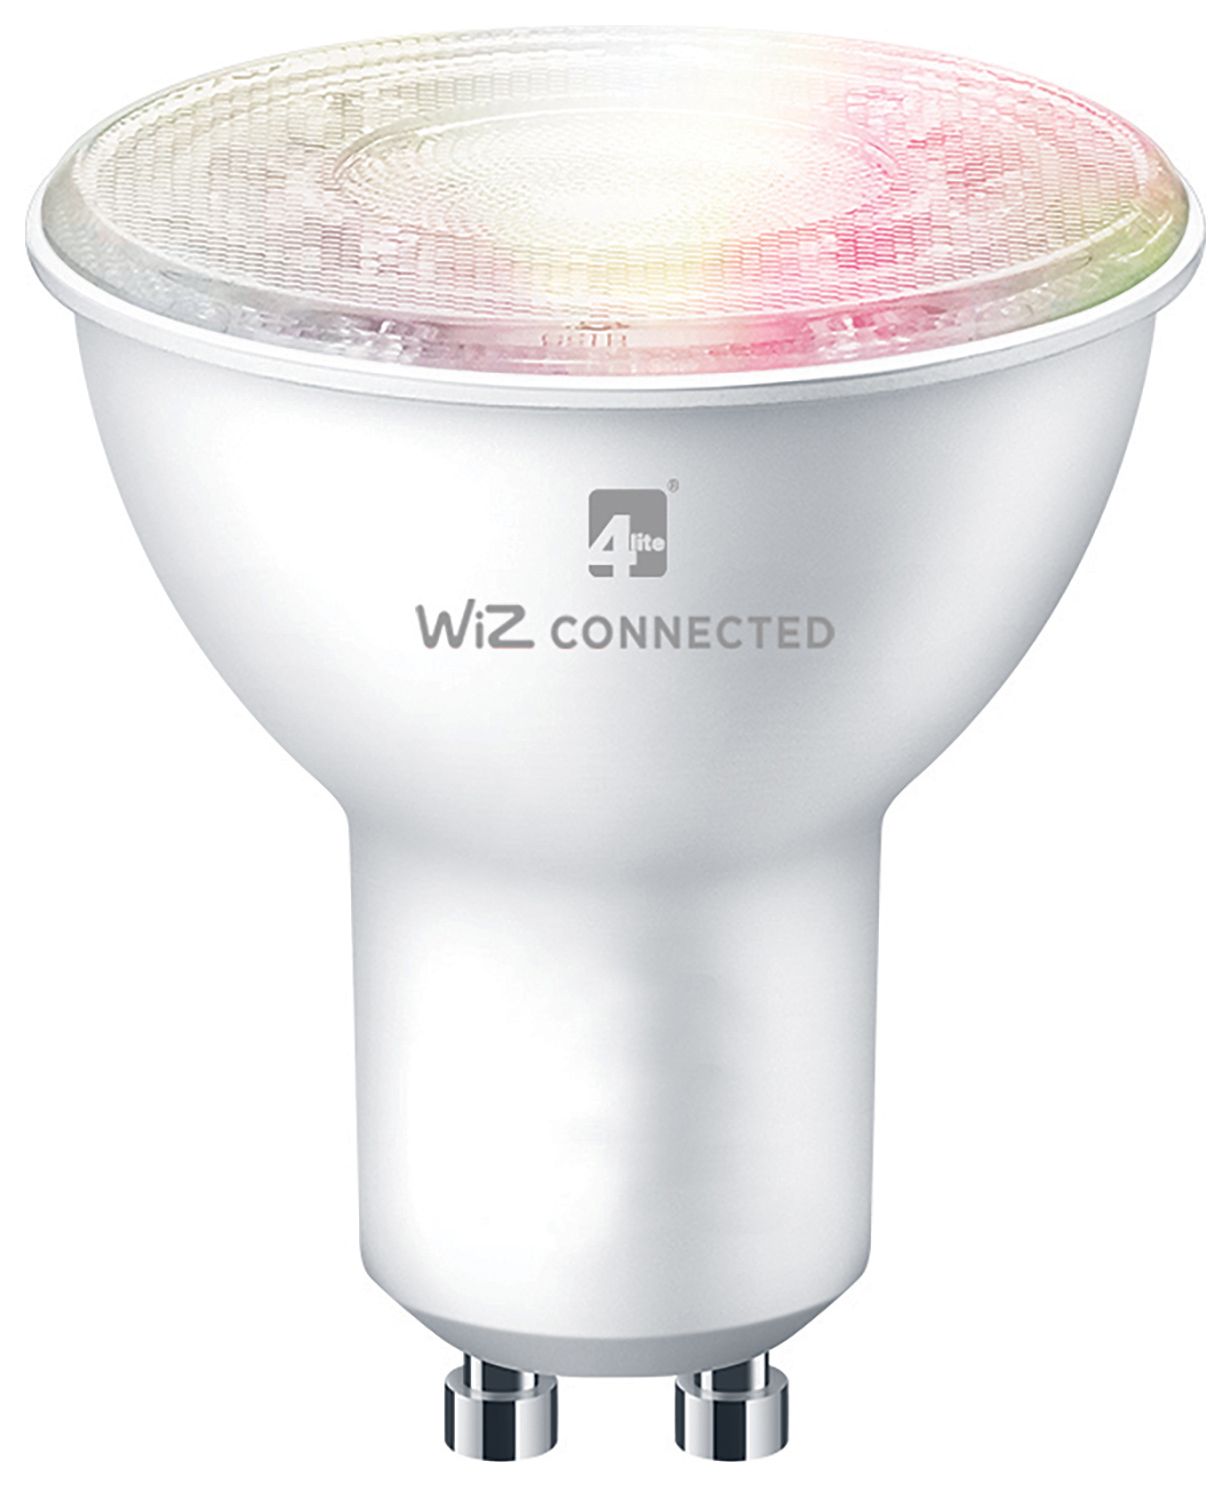 4lite WiZ Connected SMART WiFi & Bluetooth GU10 Bulb - Colours & Tuneable White